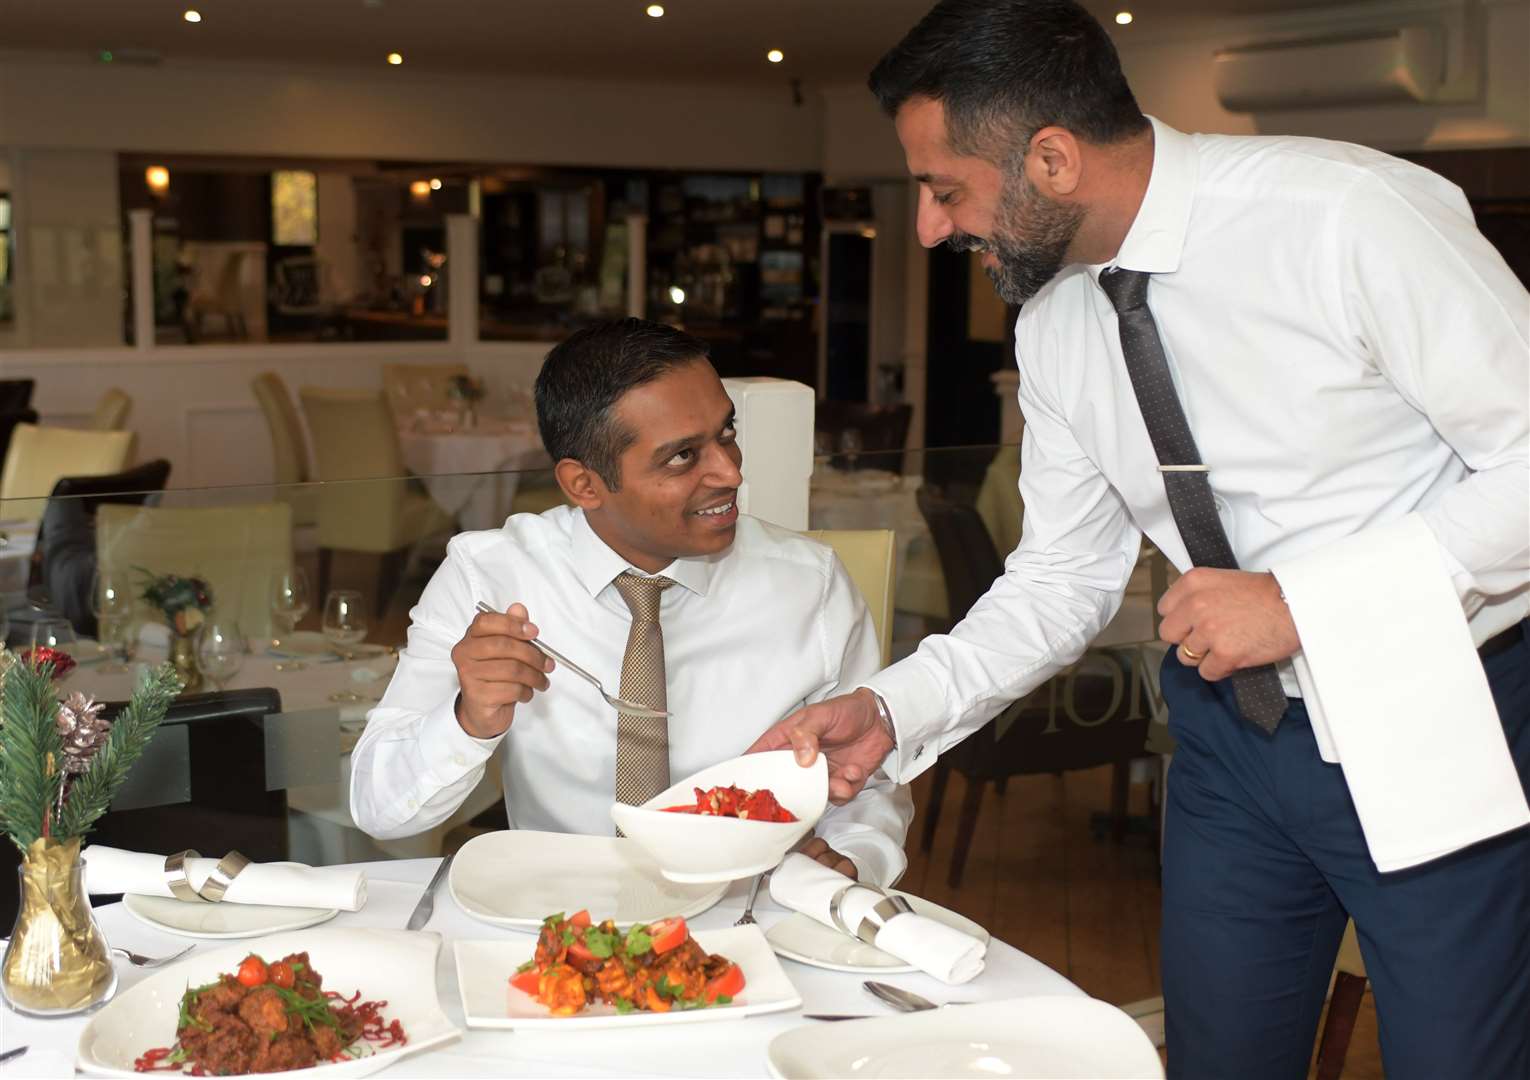 Habib Siddiq of The Cinnamon Square, left, is served one of his own dishes